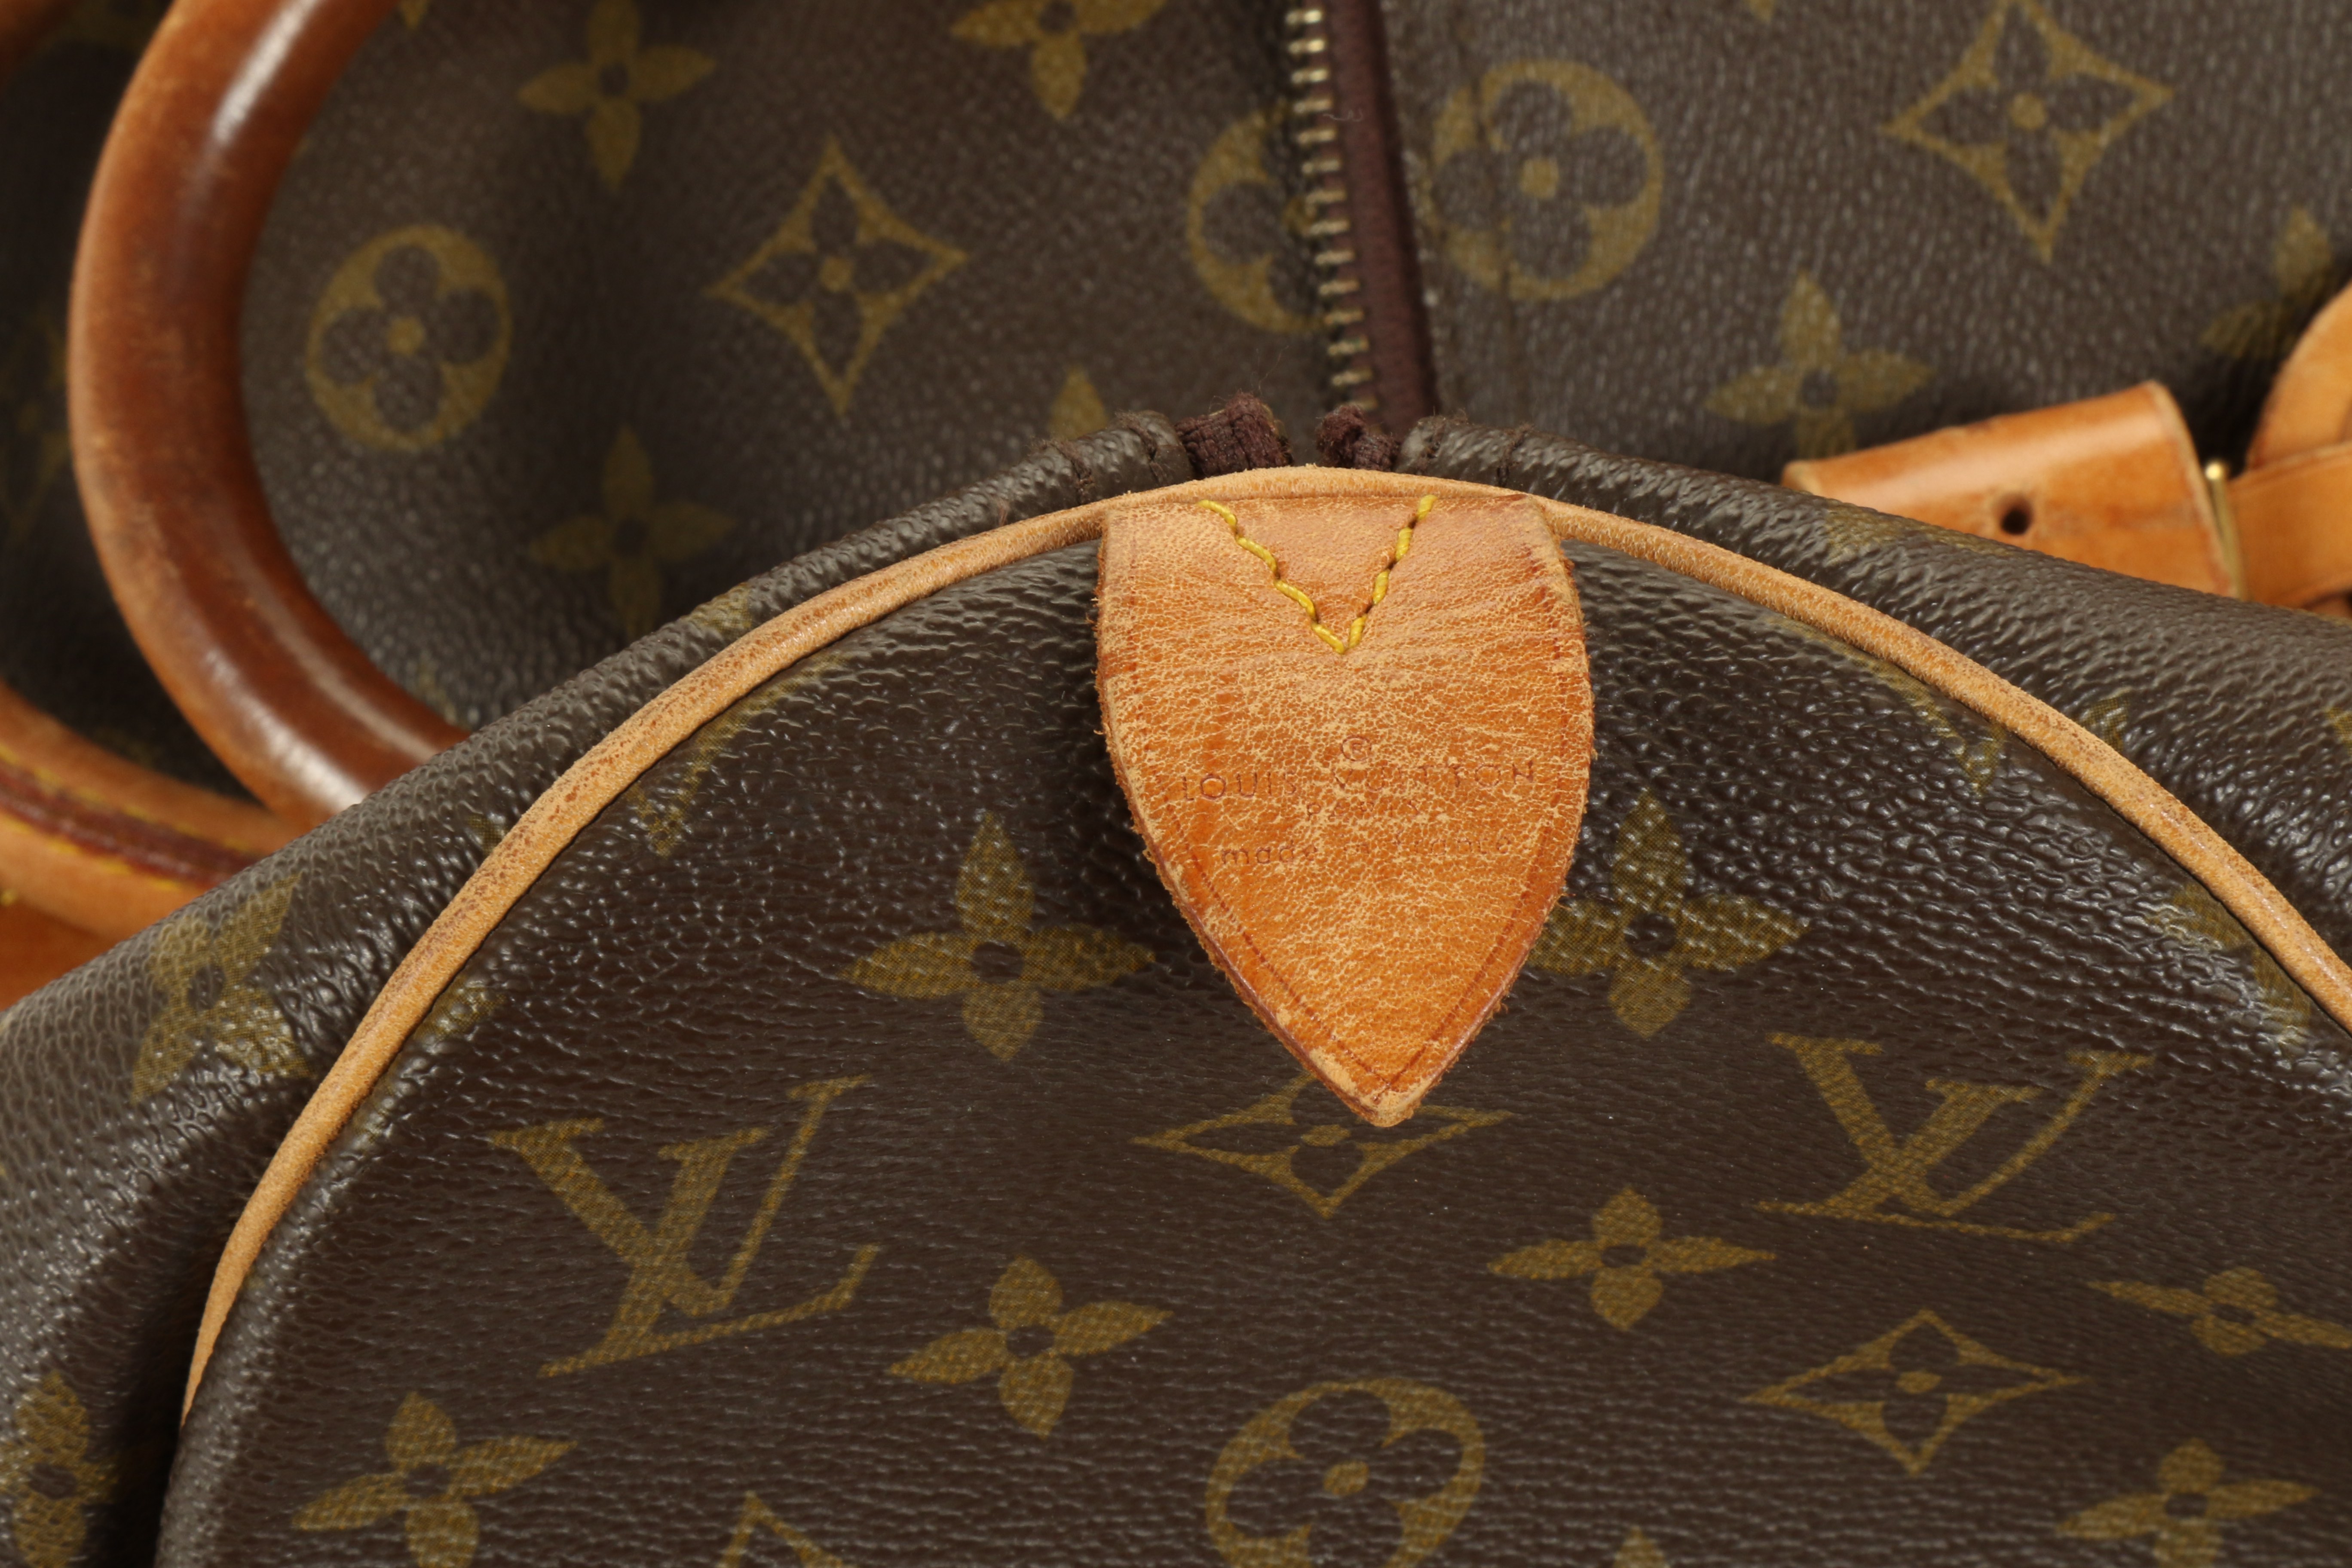 Louis Vuitton Keepall Bandouliere 45, c. 1984 (date code is faint), monogram canvas with leather - Image 6 of 6